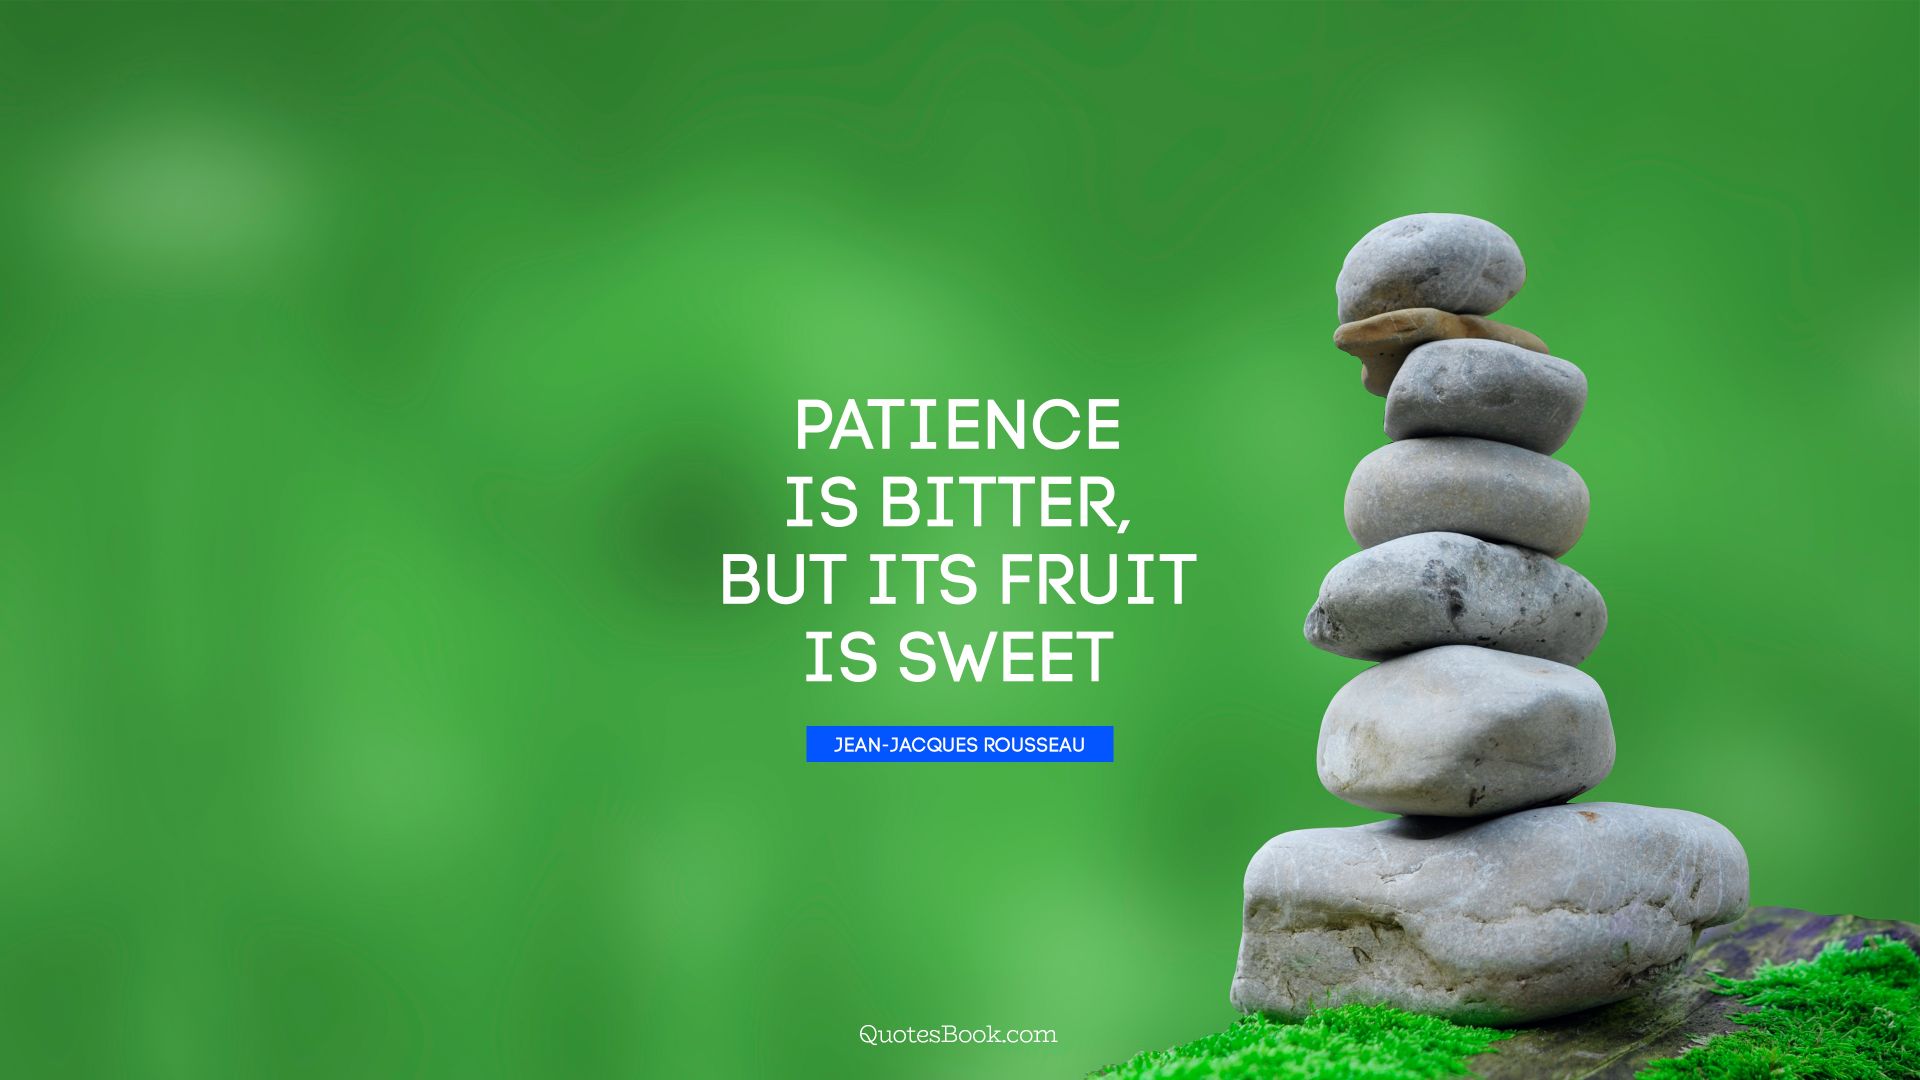 Patience is bitter, but its fruit is sweet. - Quote by Jean-Jacques Rousseau